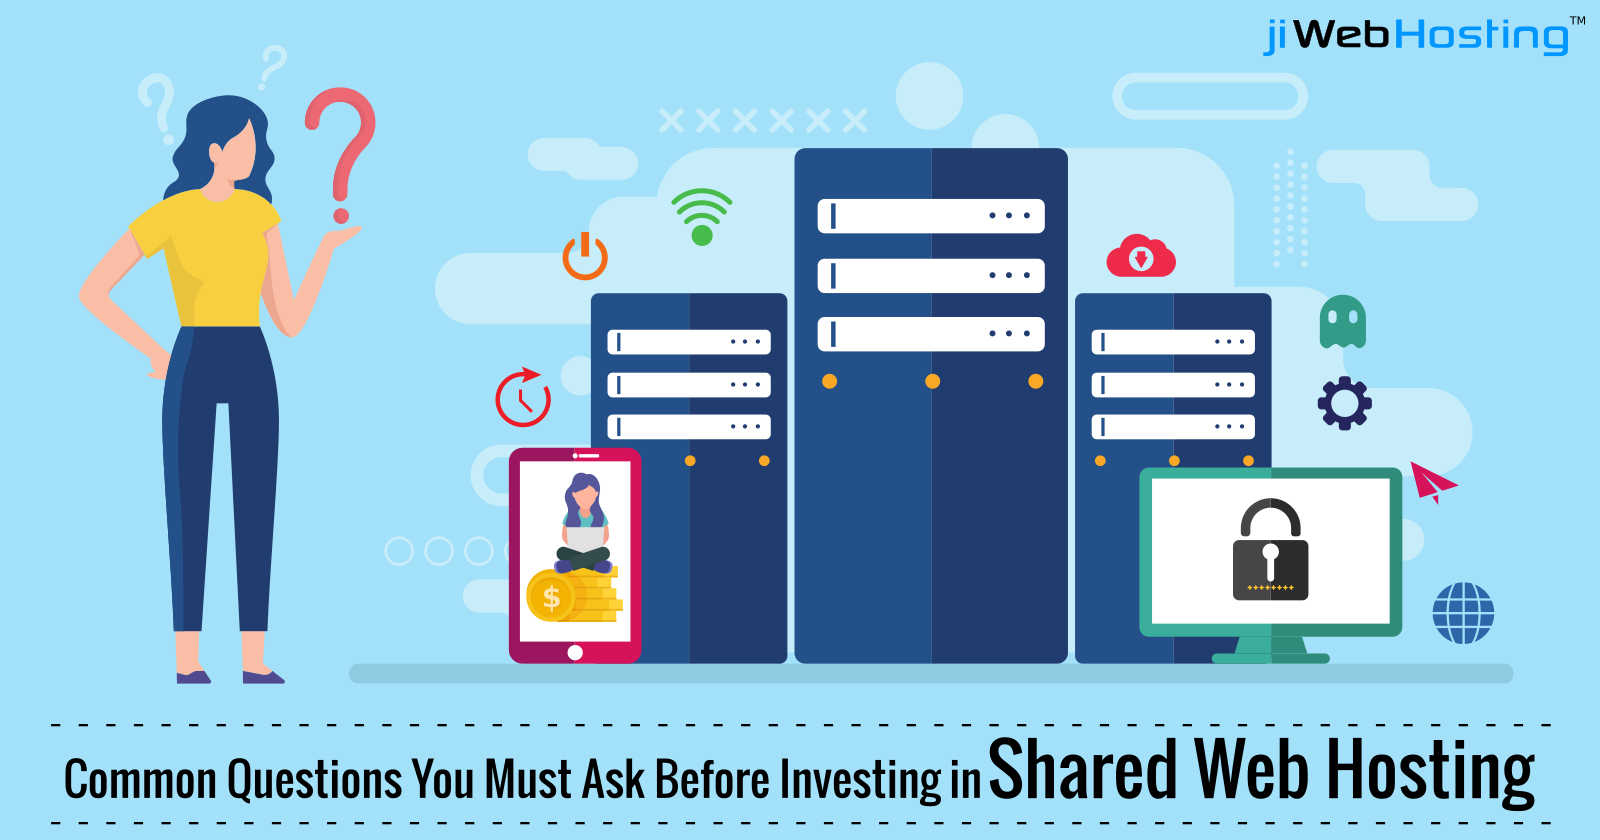 Common Questions You Must Ask Before Investing in Shared Web Hosting